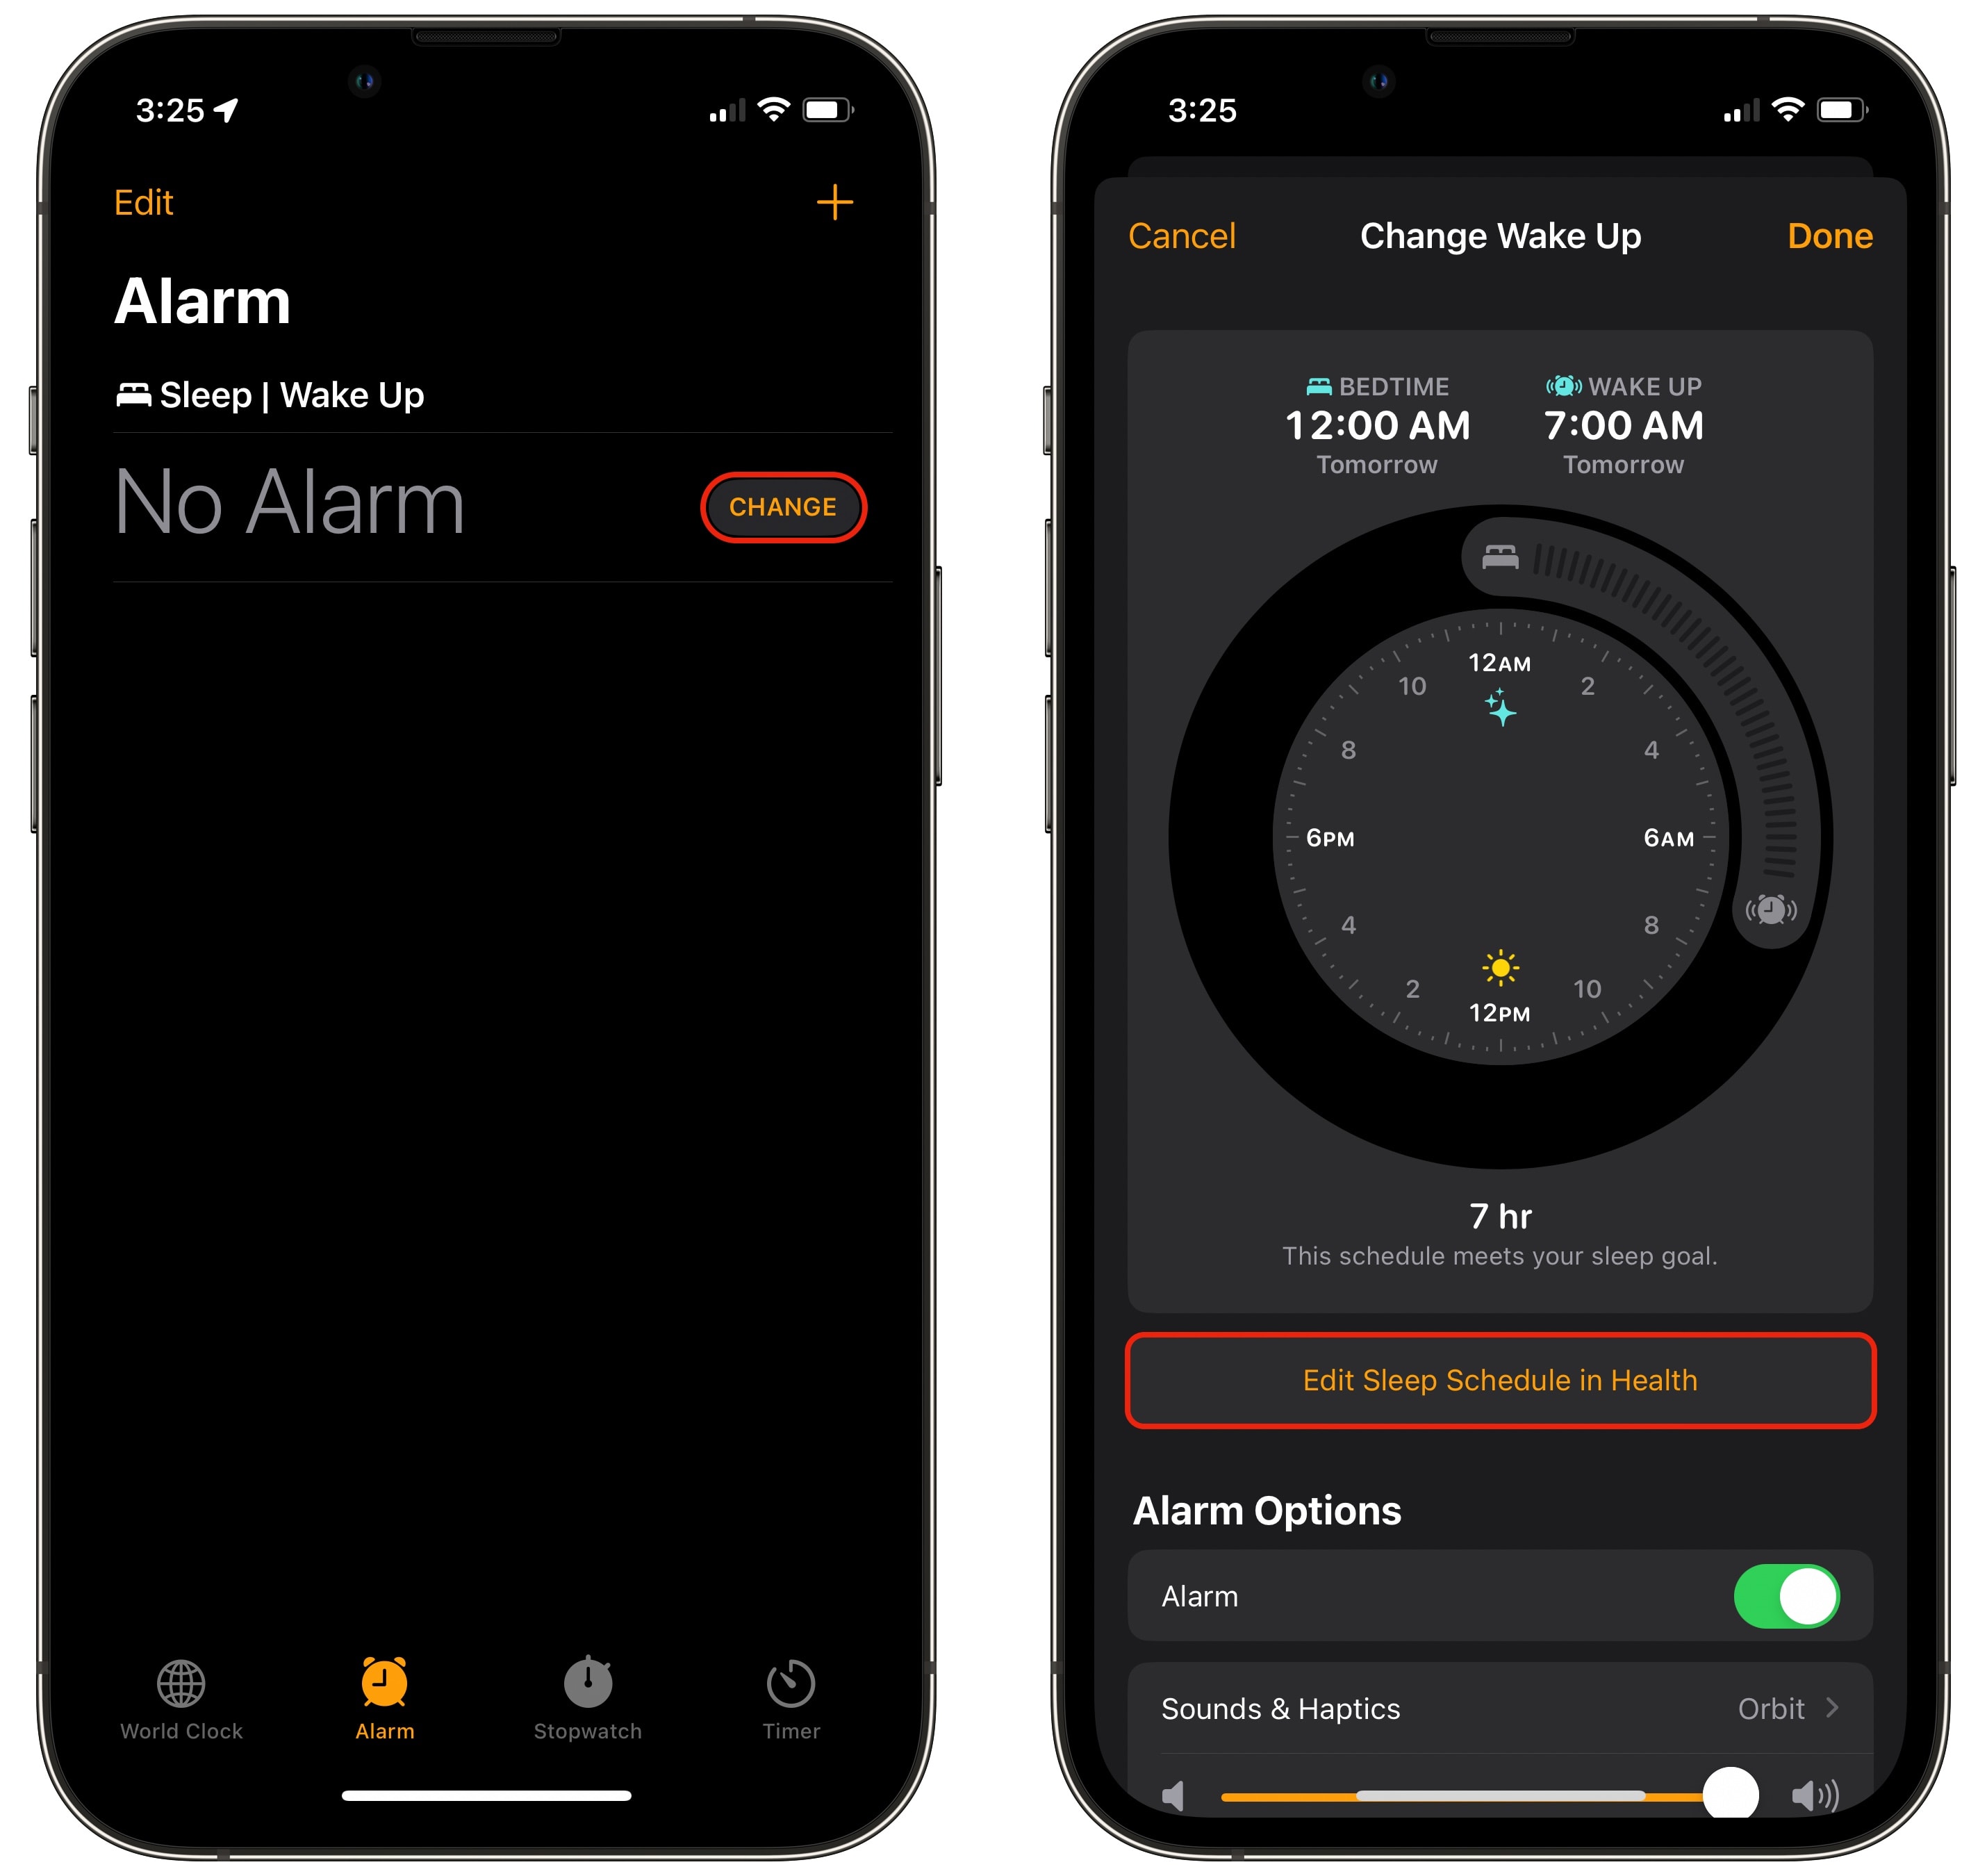 To track sleep stages with Apple Watch, first edit your sleep schedule in Clock.